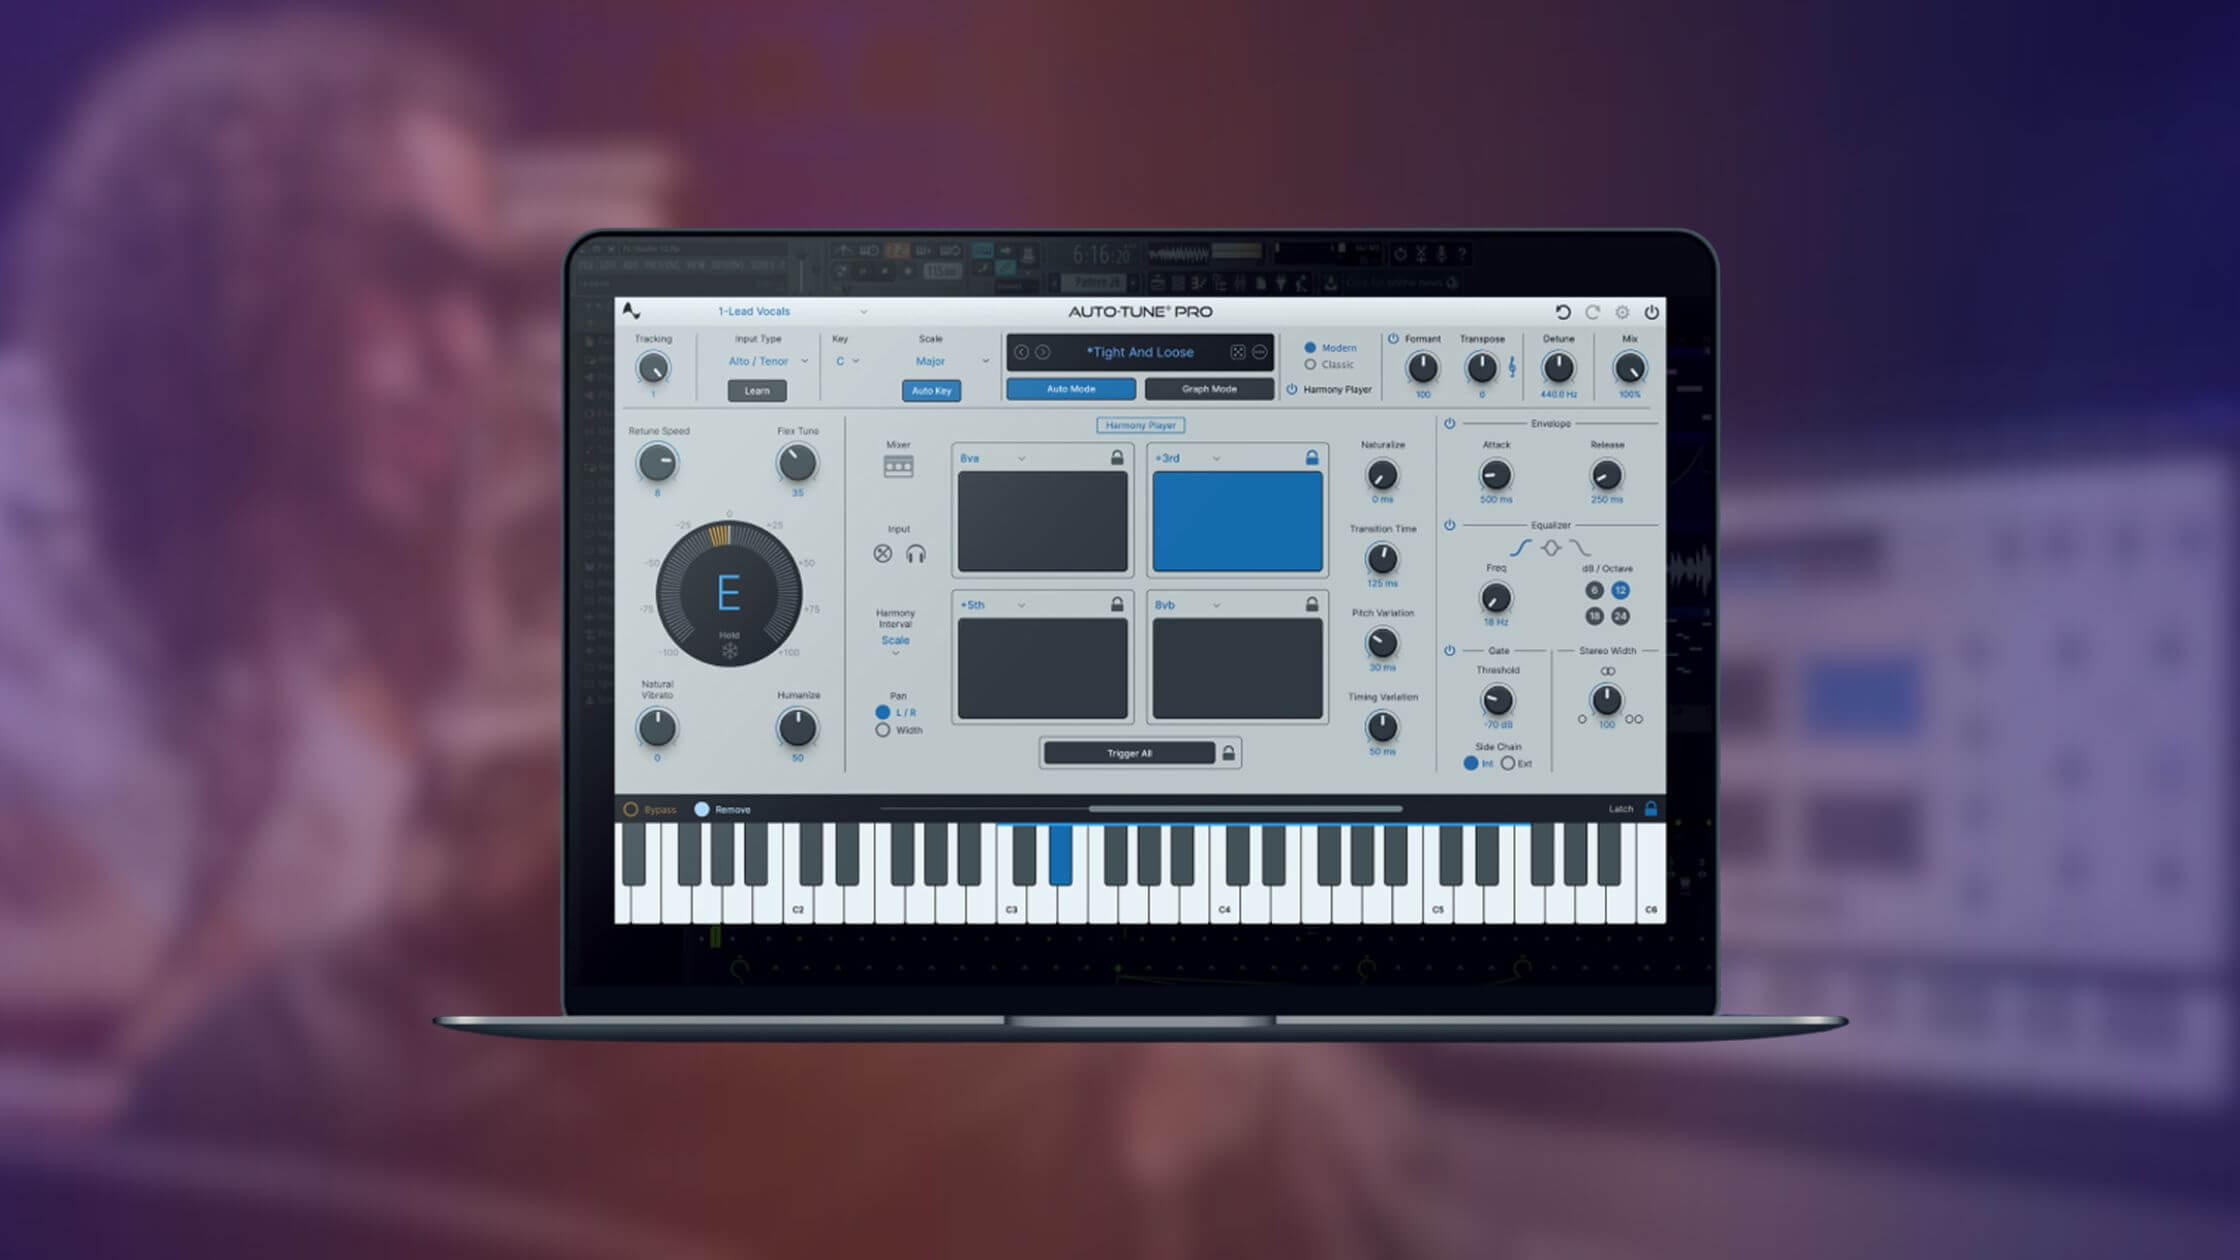 Antares launch Auto-Tune Pro 11: feature rich and hands on control over vocal pitching